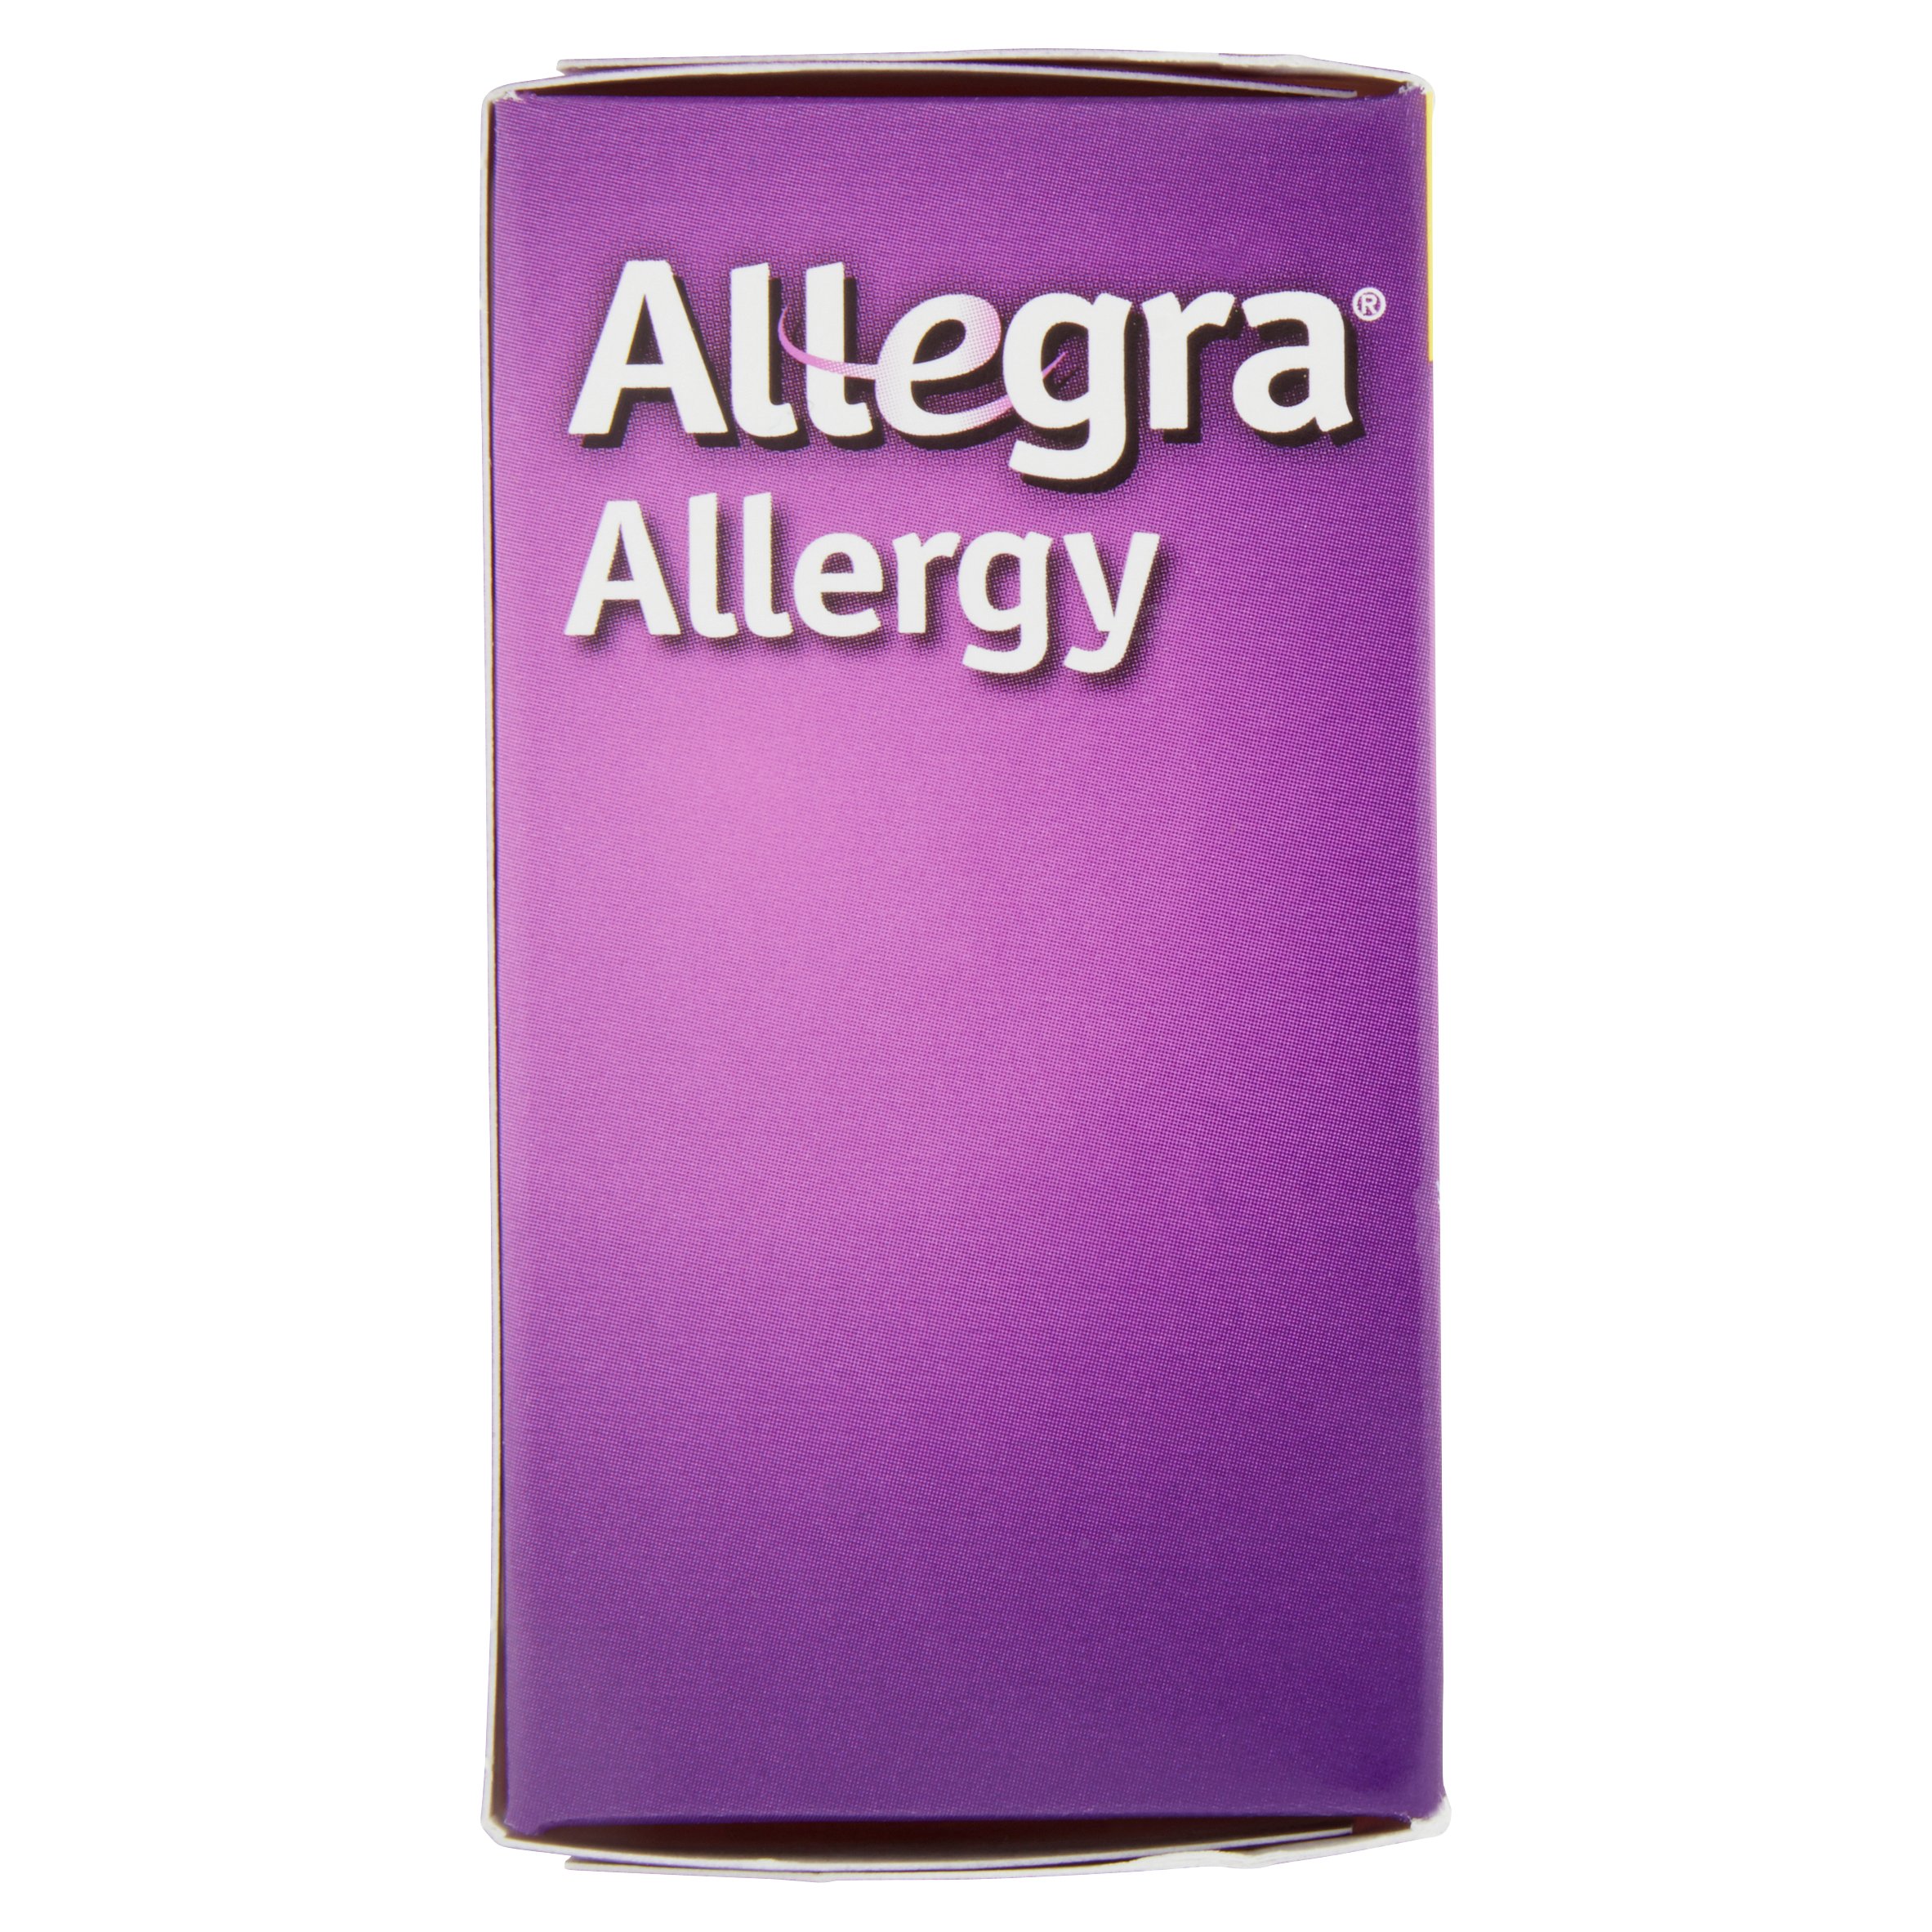 Allegra 24 Hour Allergy Tablets, 40 Ct - image 3 of 5